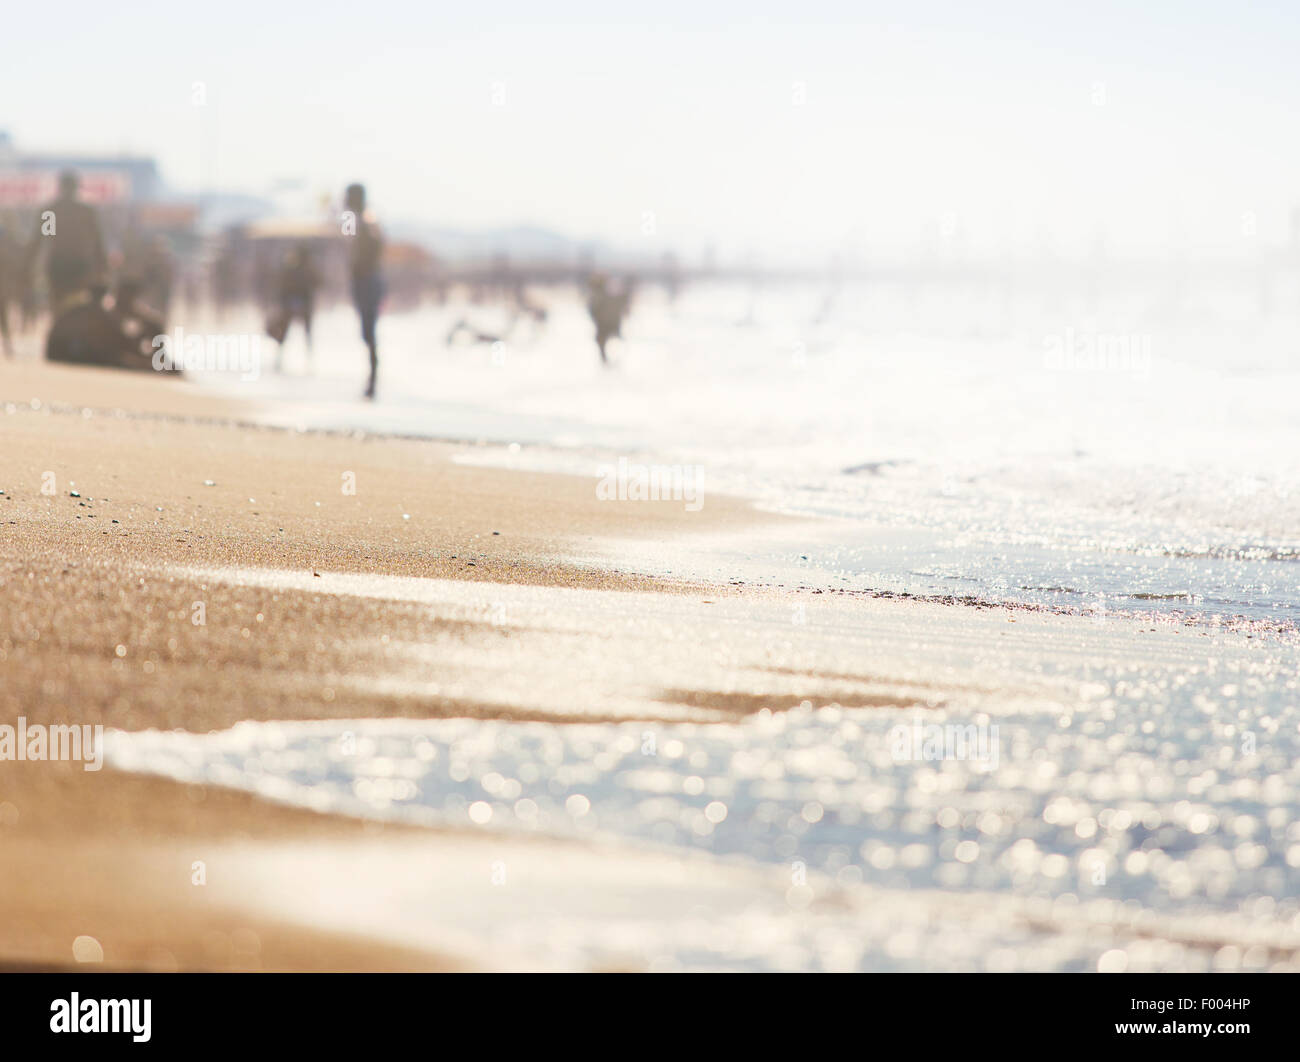 A wave thinning out of the sand of a beach, defocused people on the background Stock Photo